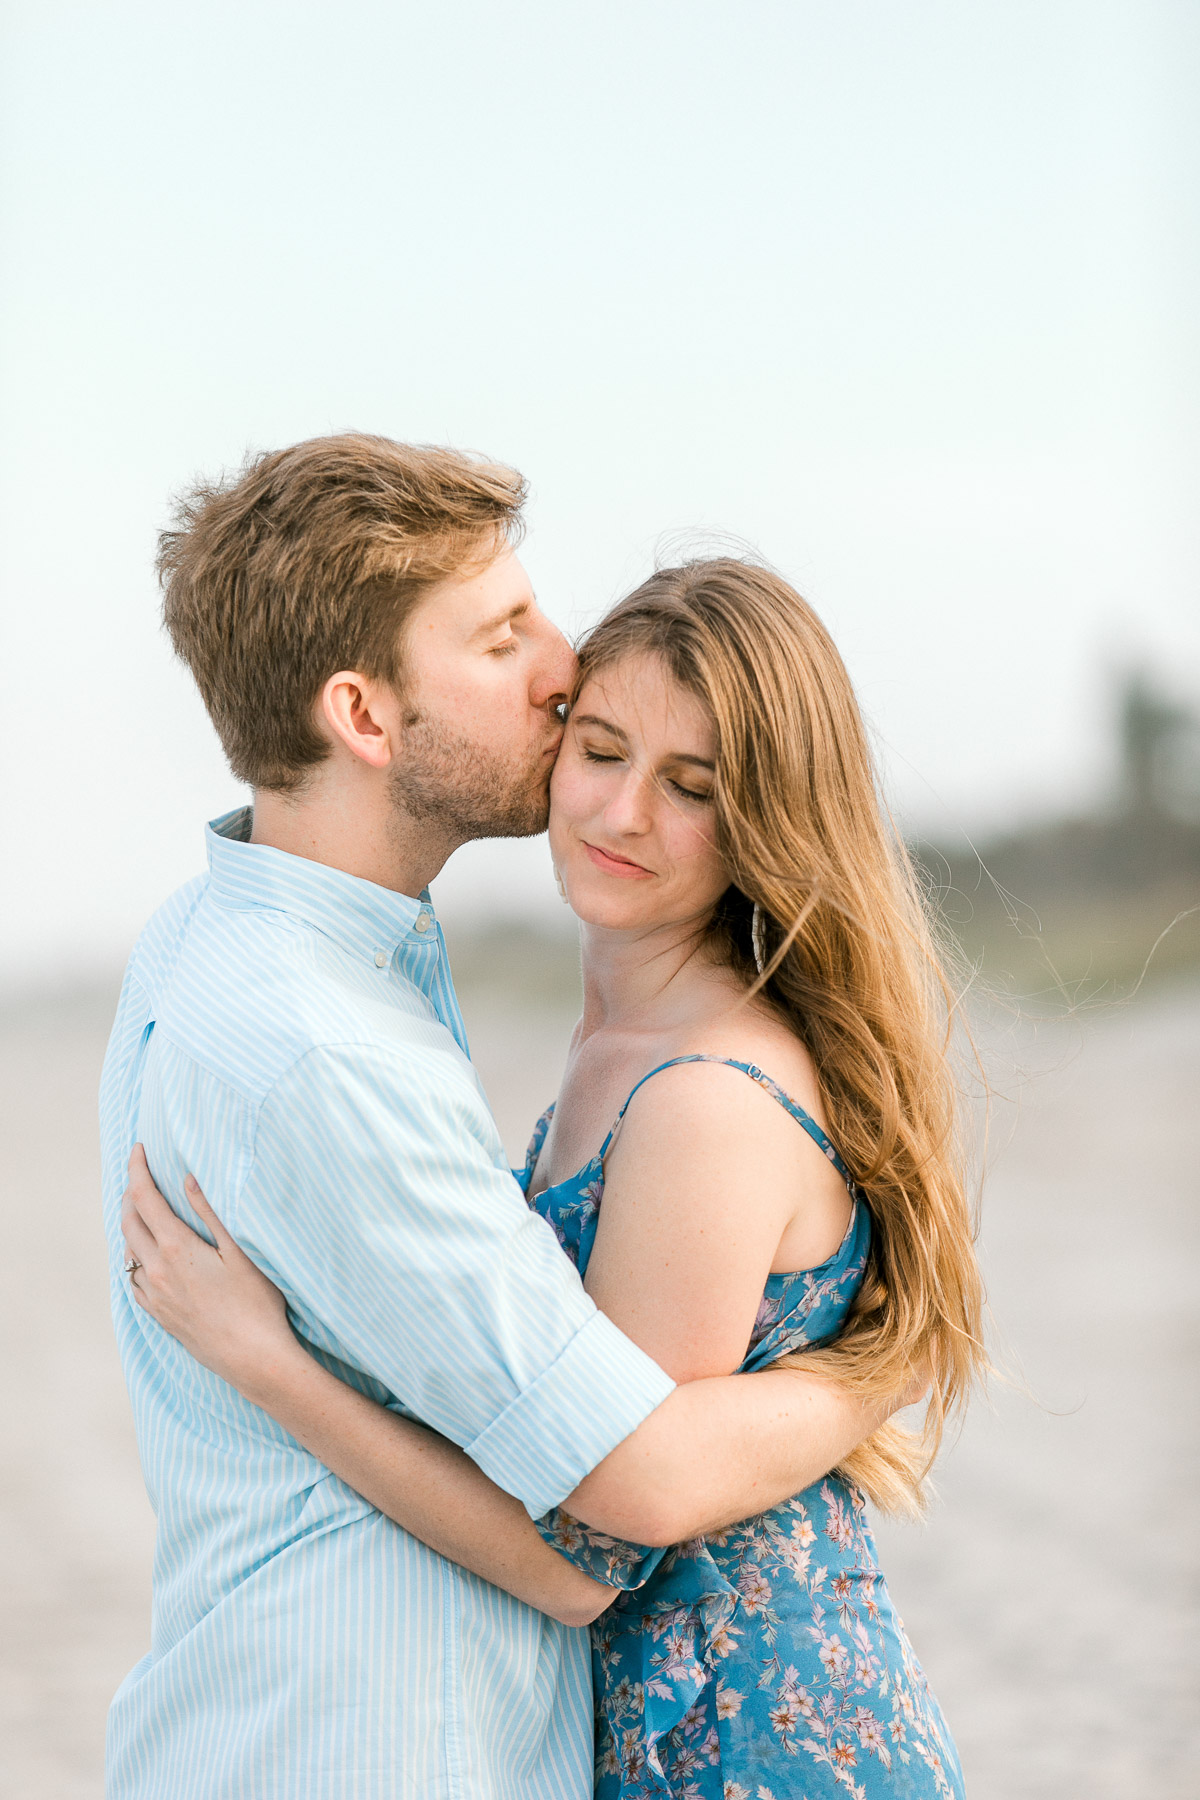 Guy kisses girl on the side of the head at beachside engagement session